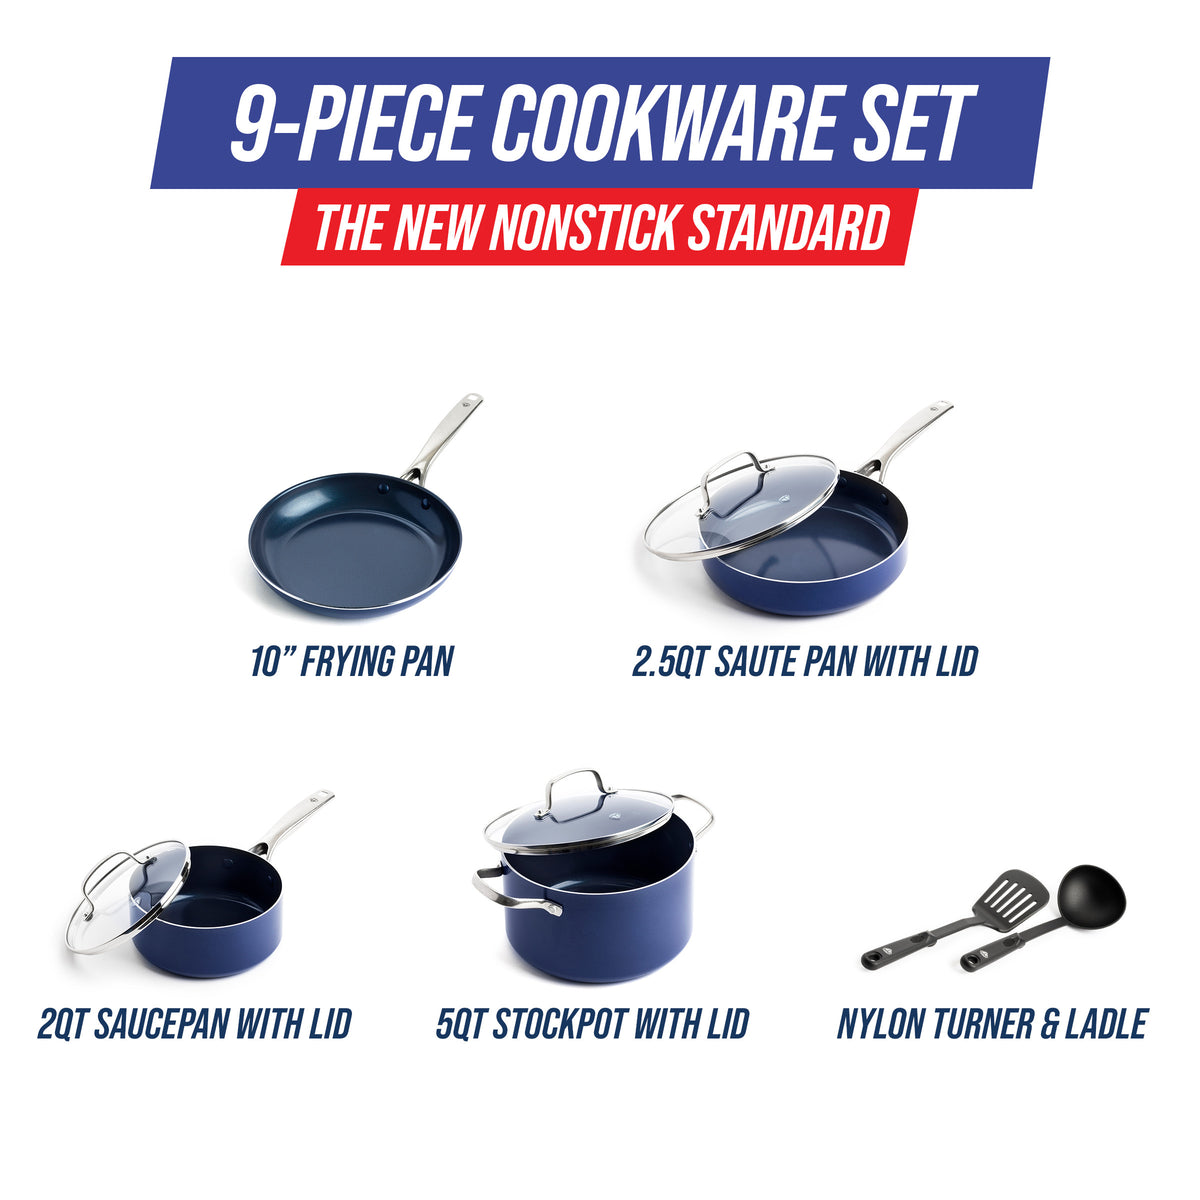 Reviews for GRANITESTONE Classic Blue 20-Piece Aluminum Ultra-Durable  Non-Stick Diamond Infused Cookware and Bakeware Set